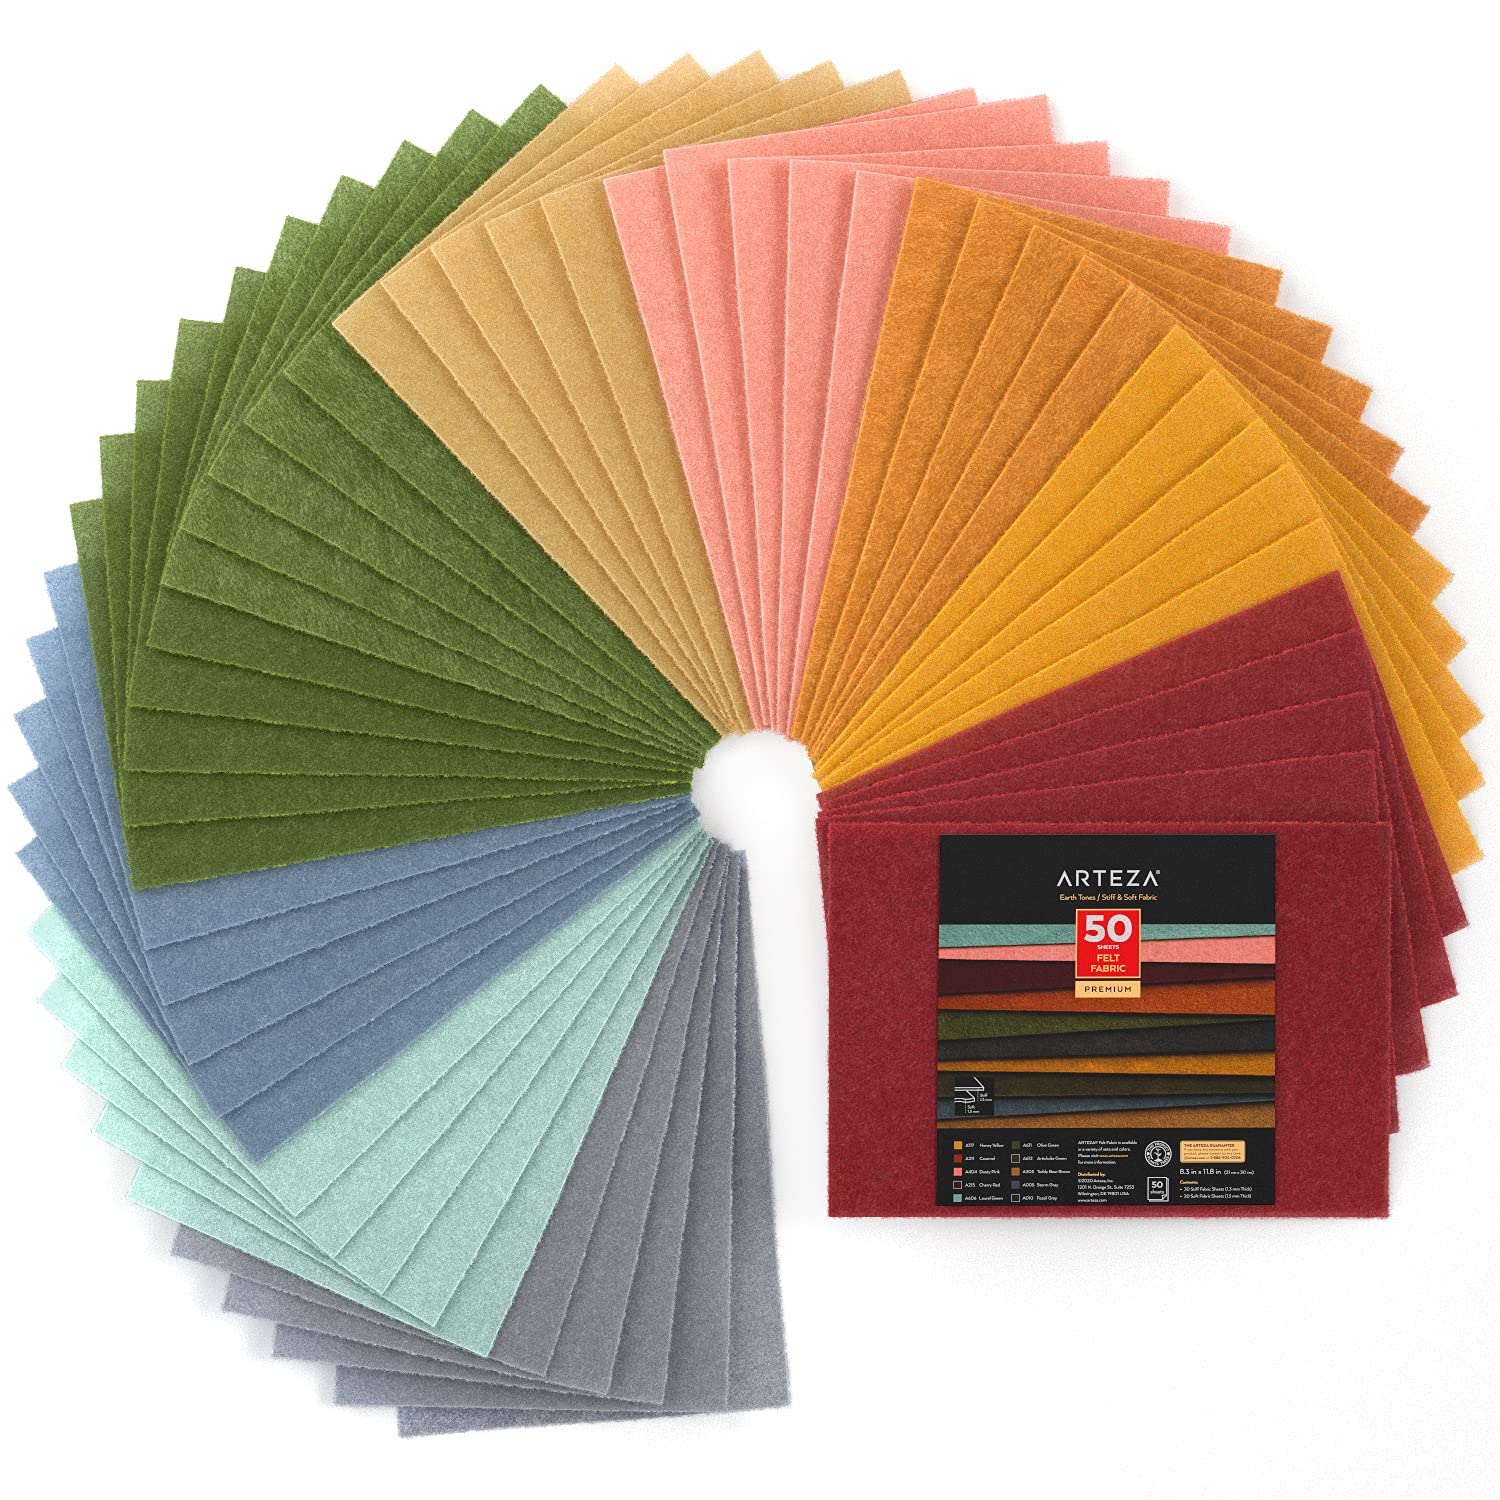 Craft Stiff Felt Squares - 8 x 8 Inch - 36 Pack - 12 Colors 3 of Each Color  